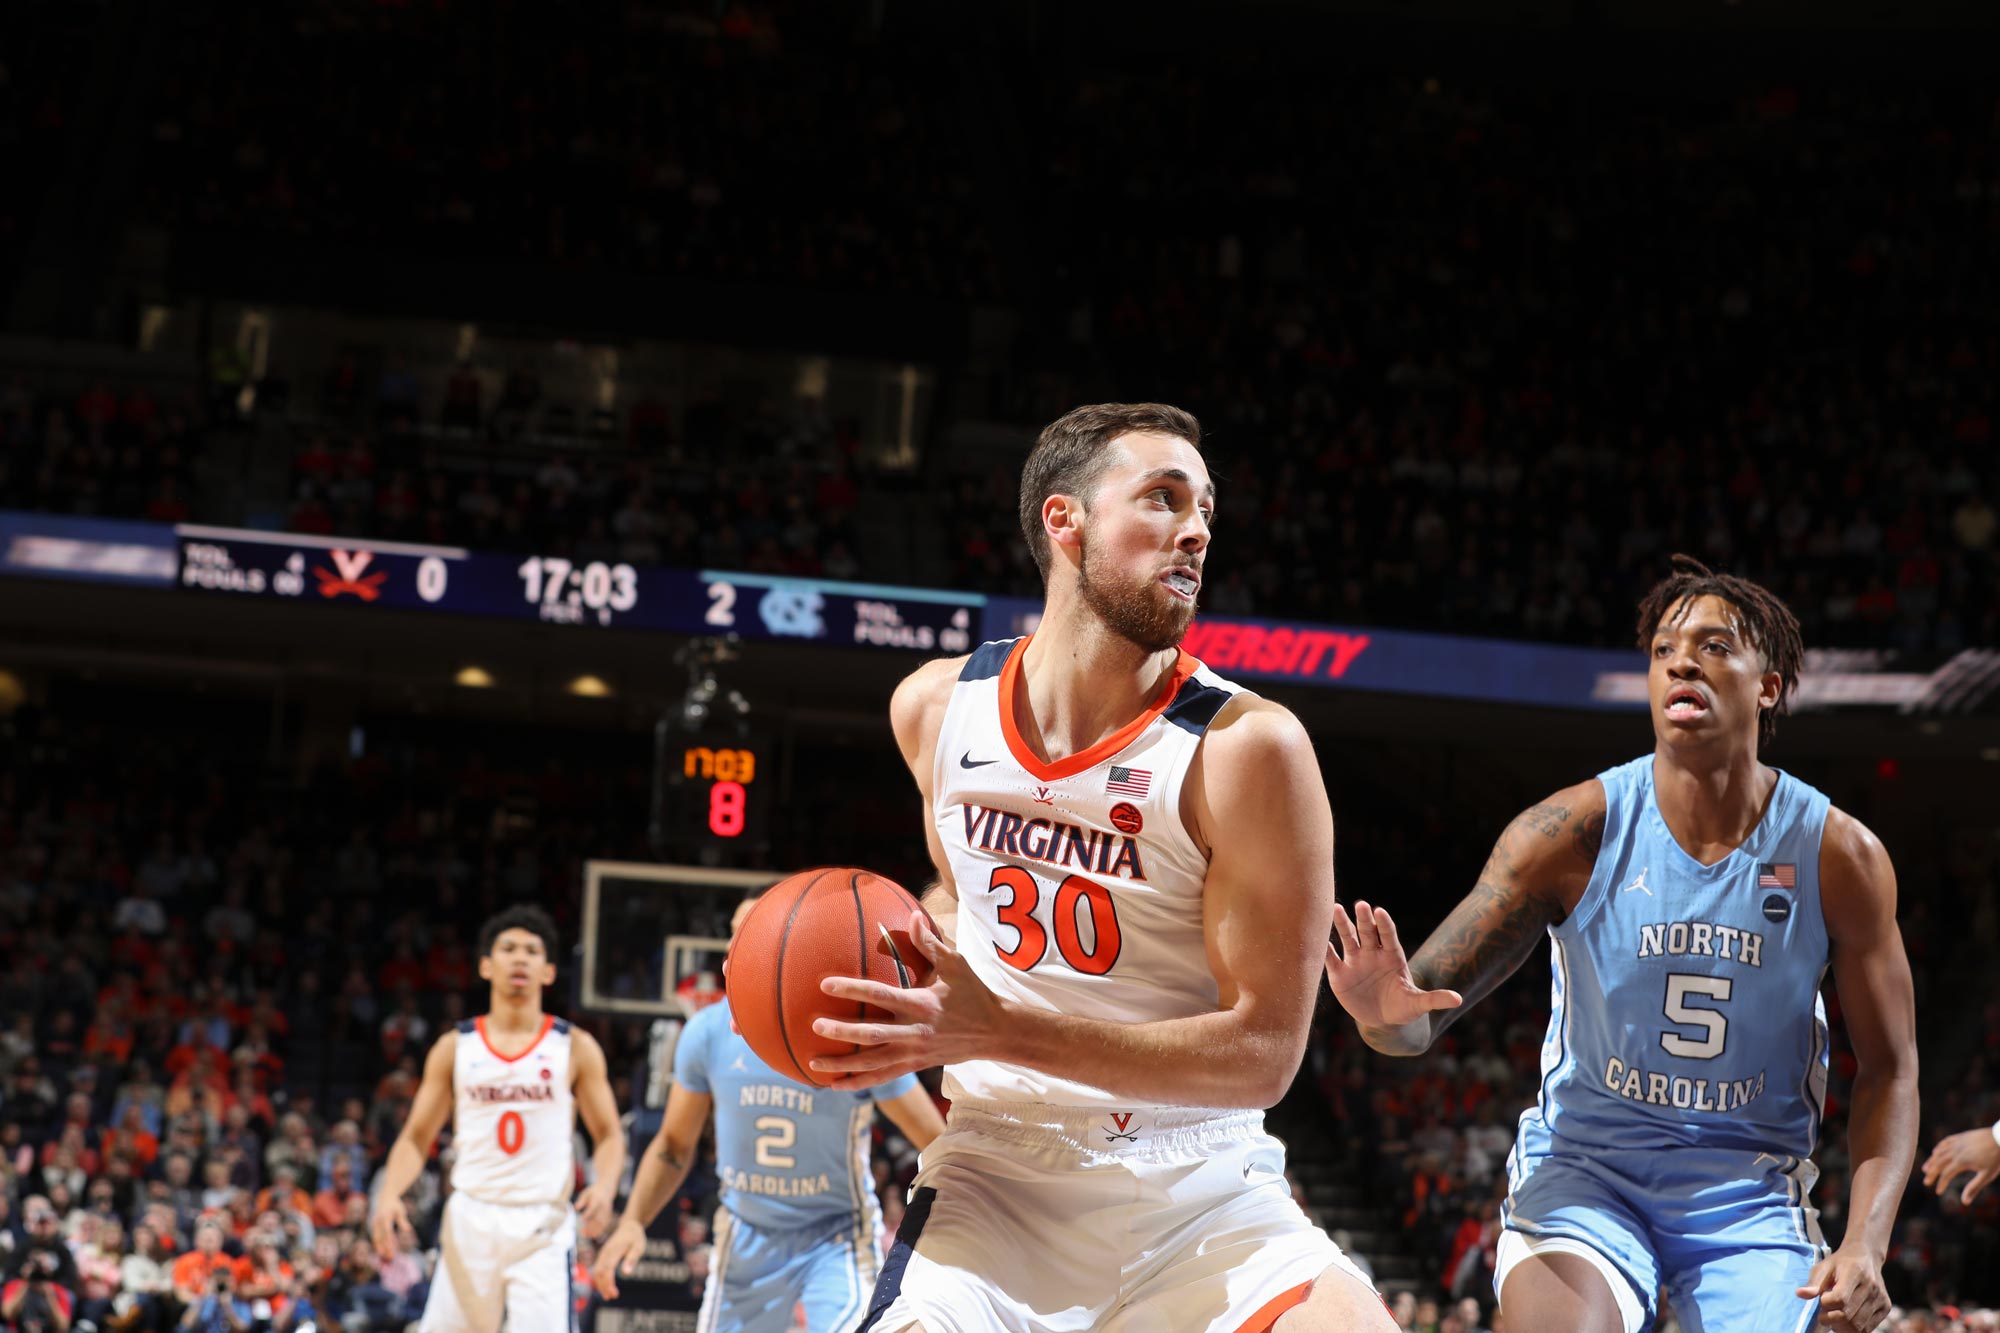 Commitment to Service at the Core of UVA Basketball, Past and Present